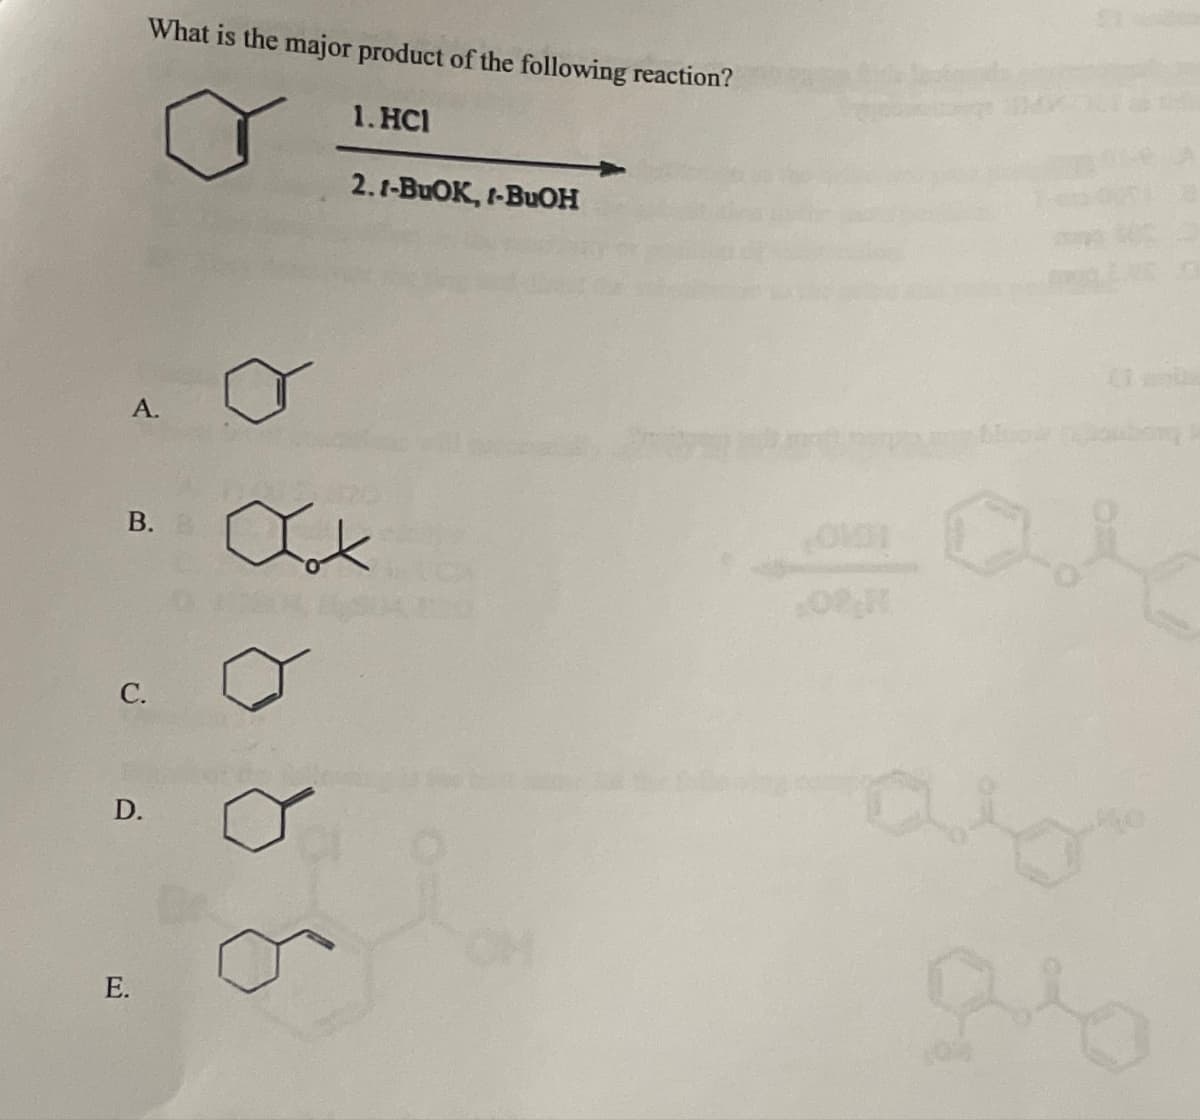 What is the major product of the following reaction?
1. HCI
2.1-BuOK, 1-BuOH
A.
B.
C.
D.
OM
02.H
E.
86